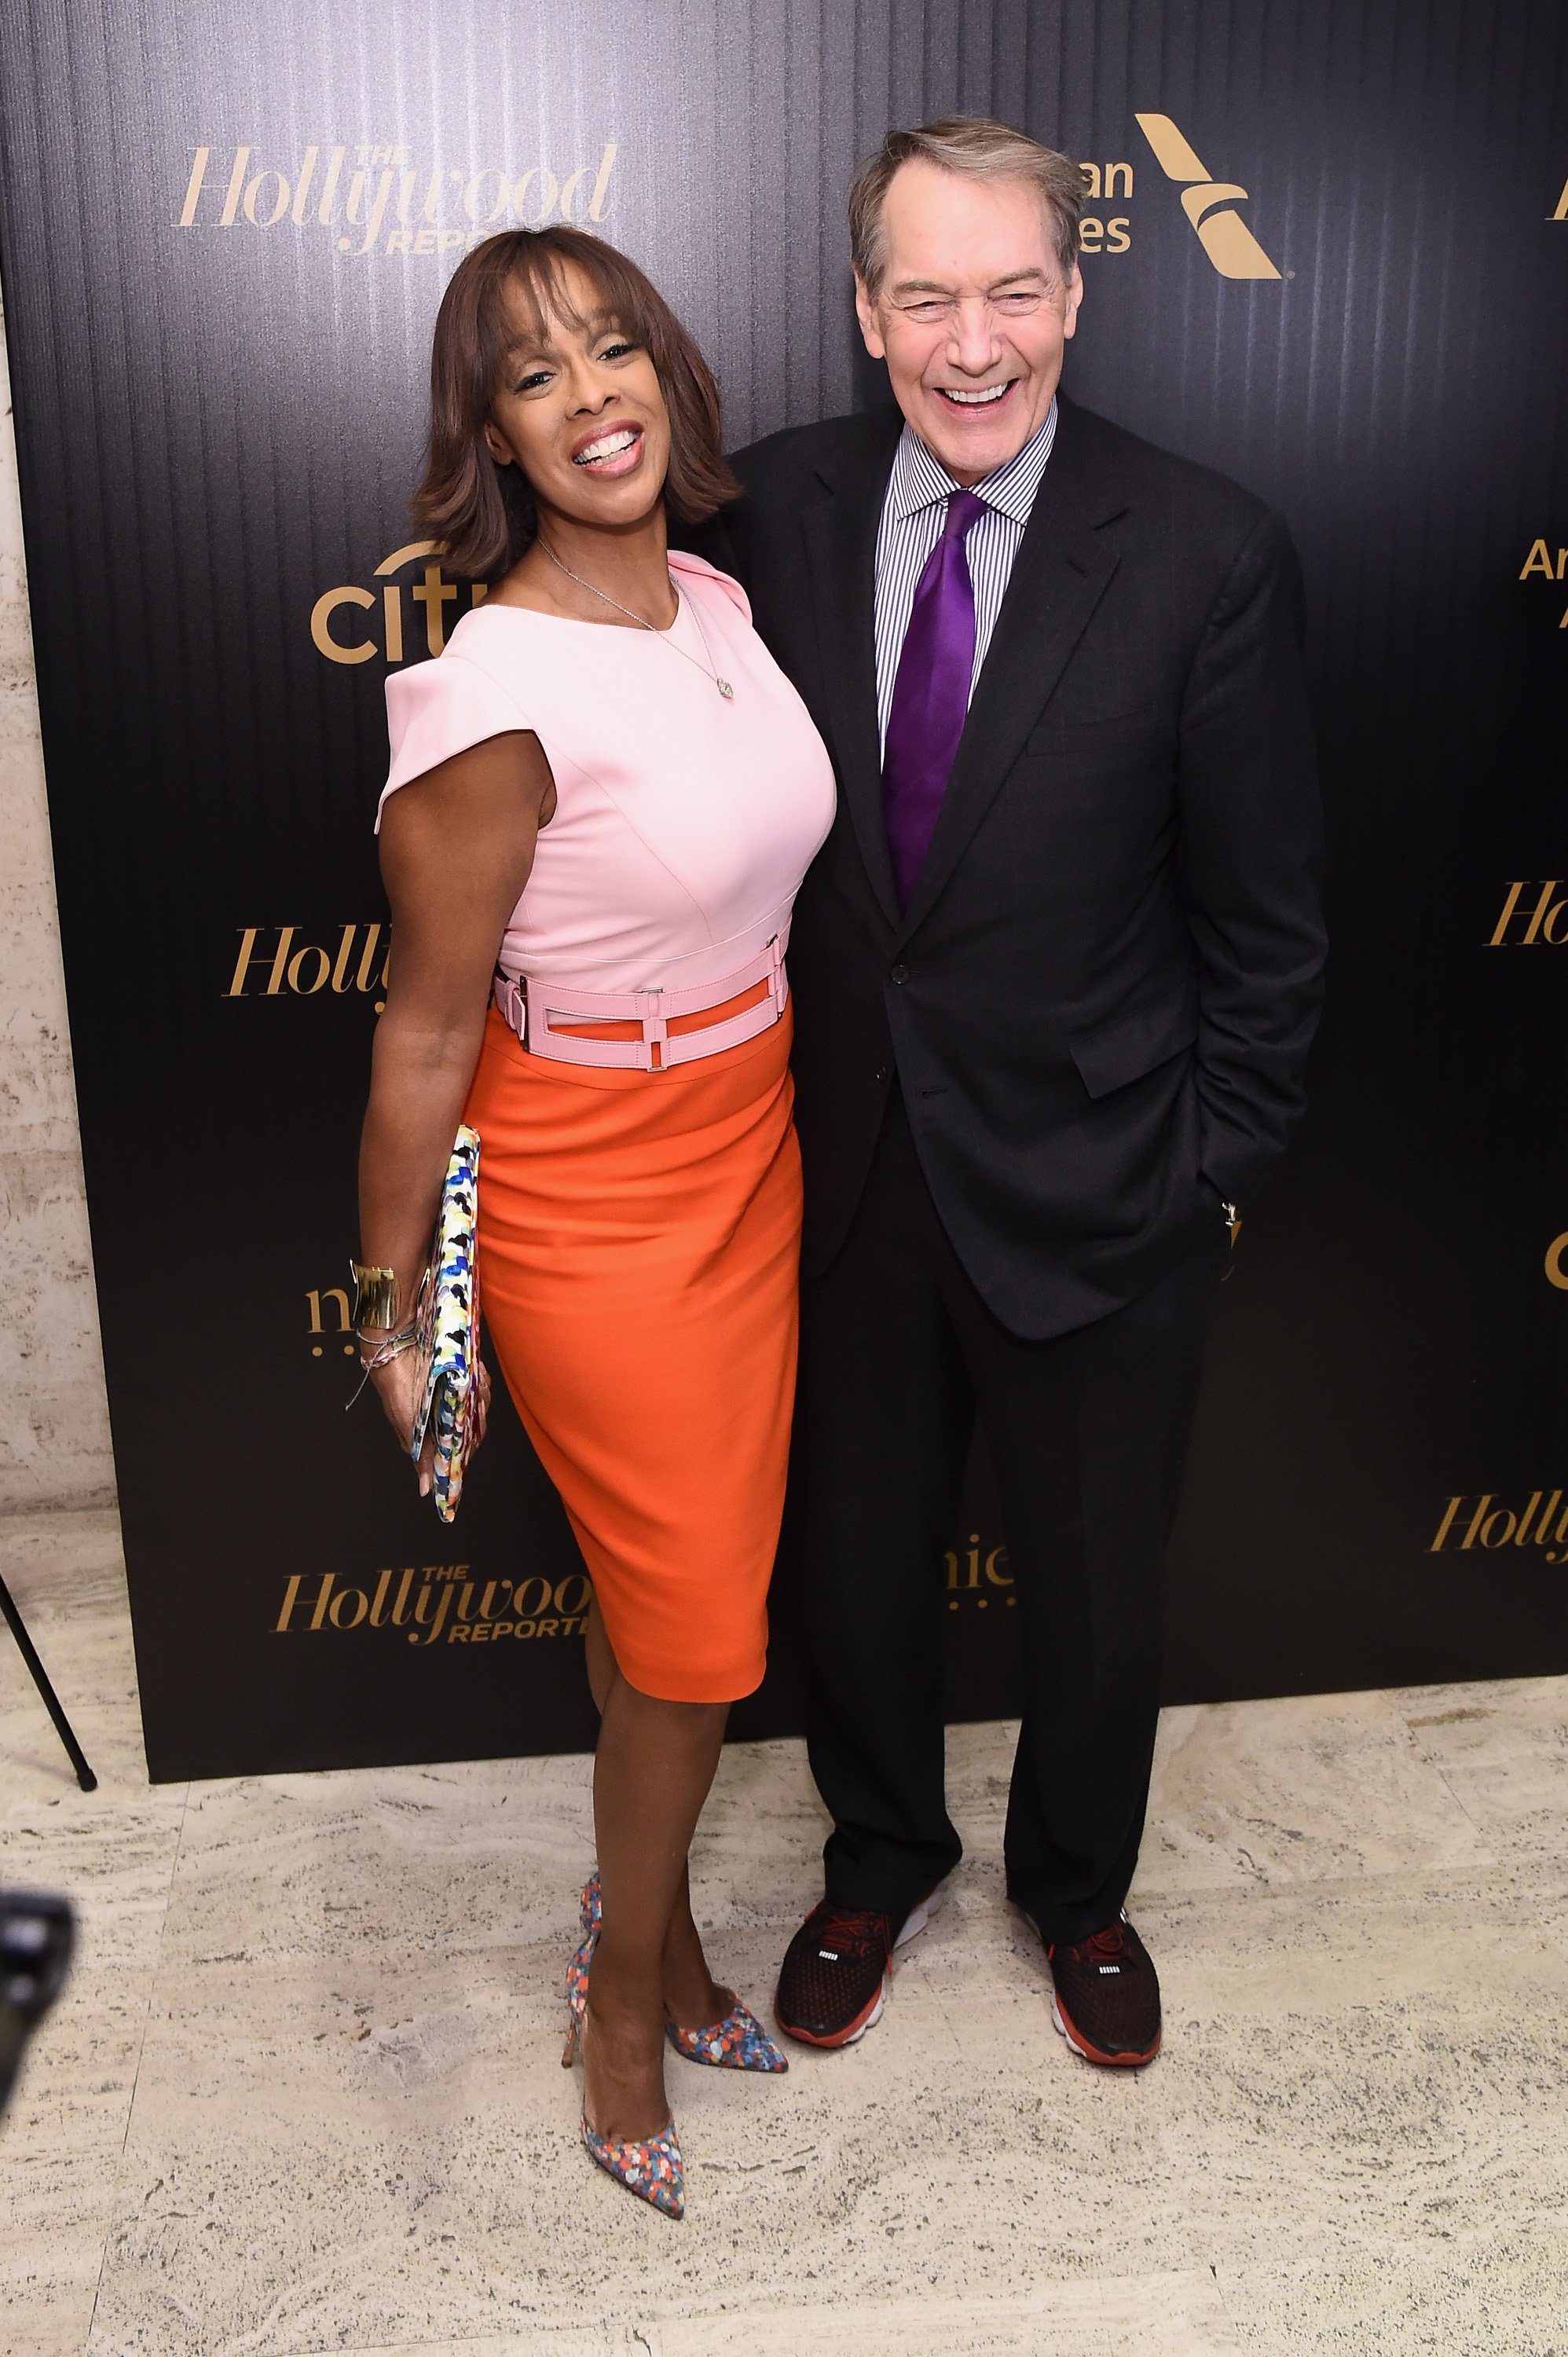 Gayle King on Relationship with Charlie Rose after Sexual Misconduct Claims